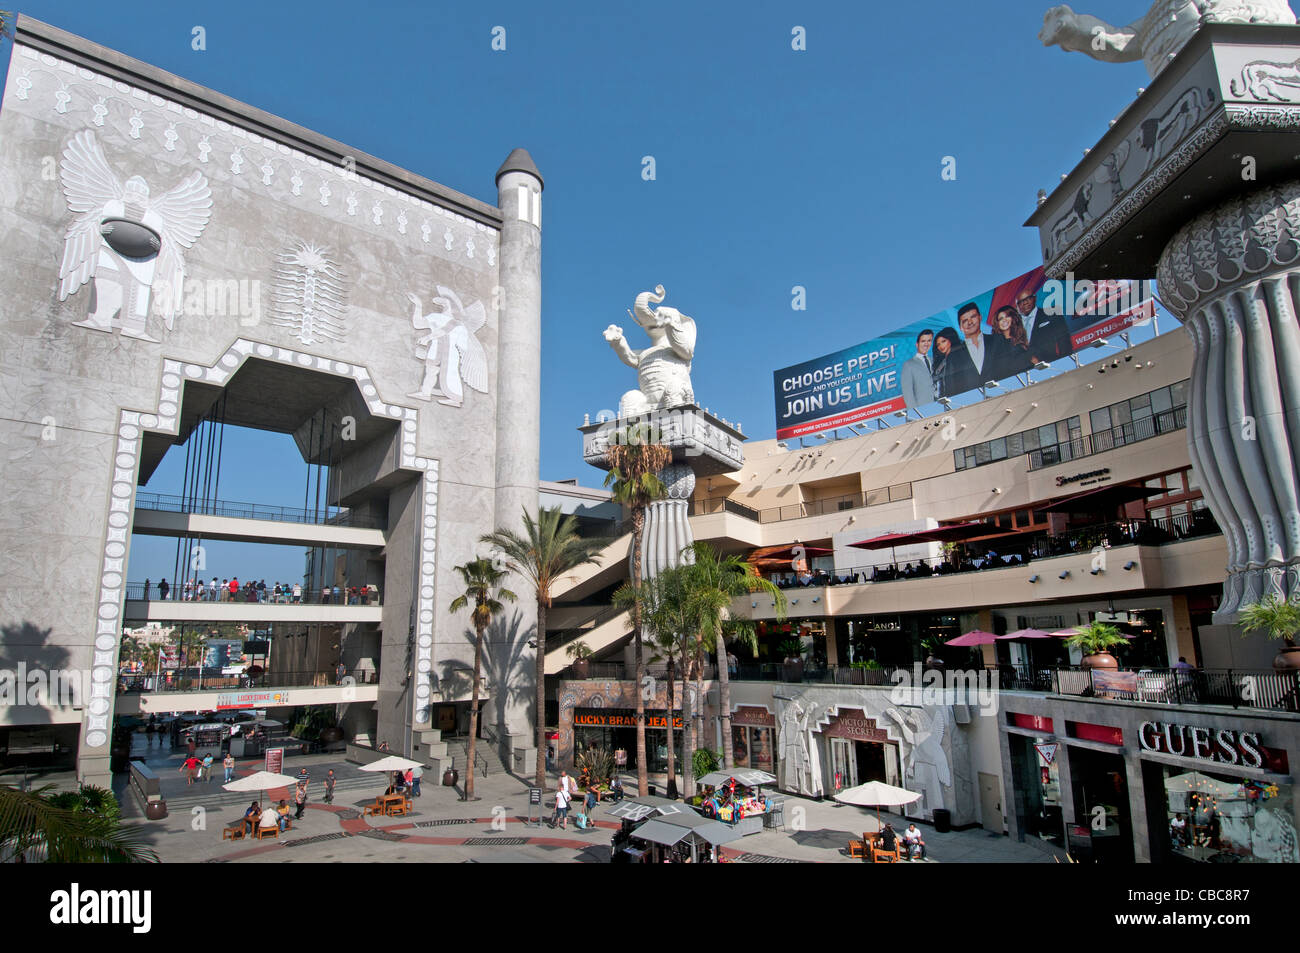 Cour Babylone Kodak Theater de Hollywood Boulevard California United States of America USA Américain Town City Banque D'Images